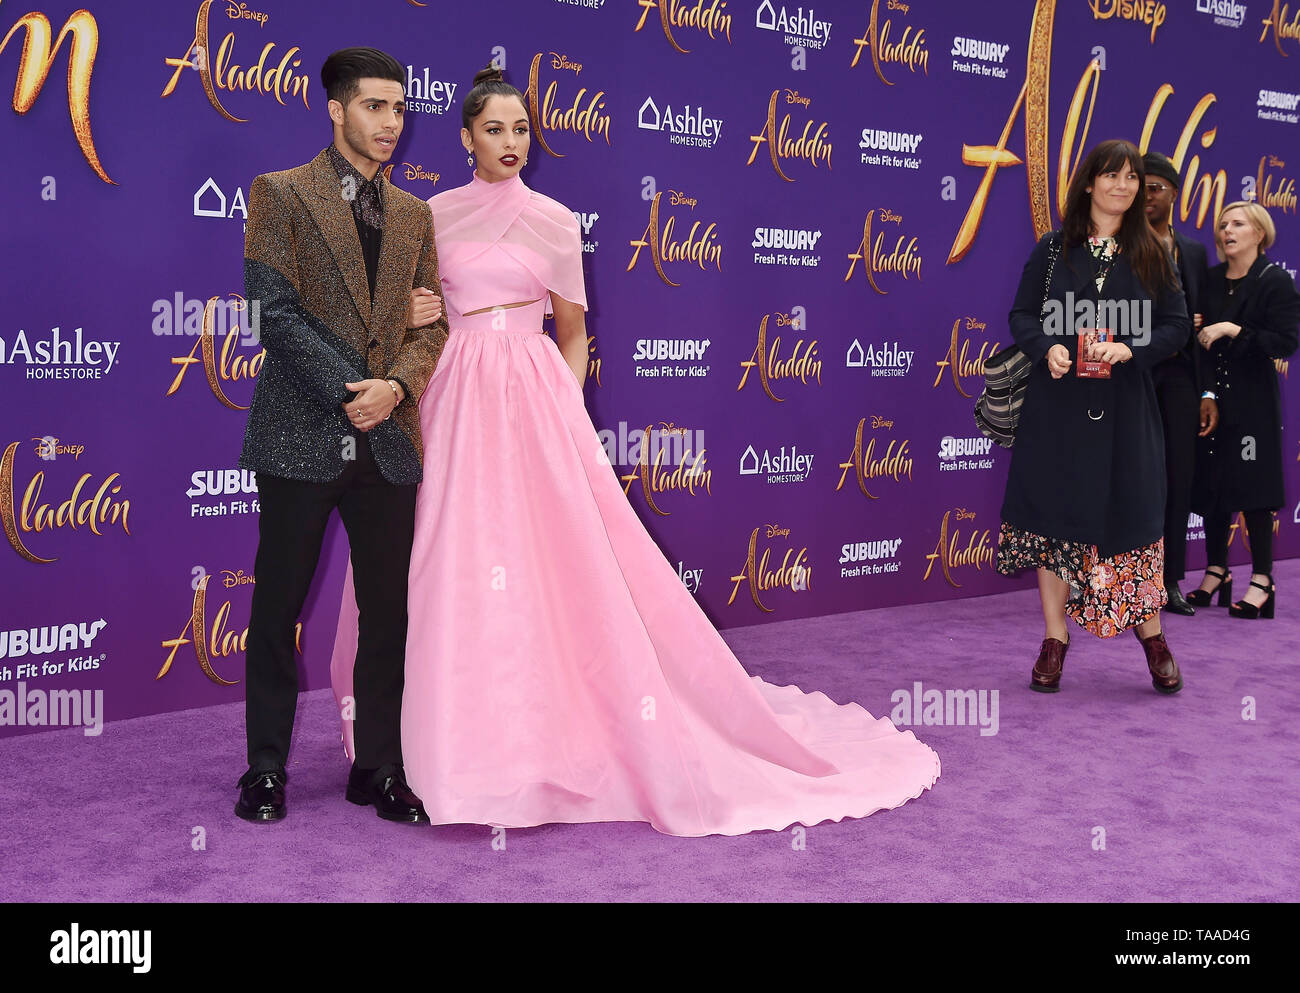 LOS ANGELES, CA - MAY 21: Mena Massoud and Naomi Scott attend the premiere of Disney's 'Aladdin' at El Capitan Theatre on May 21, 2019 in Los Angeles, California. Stock Photo